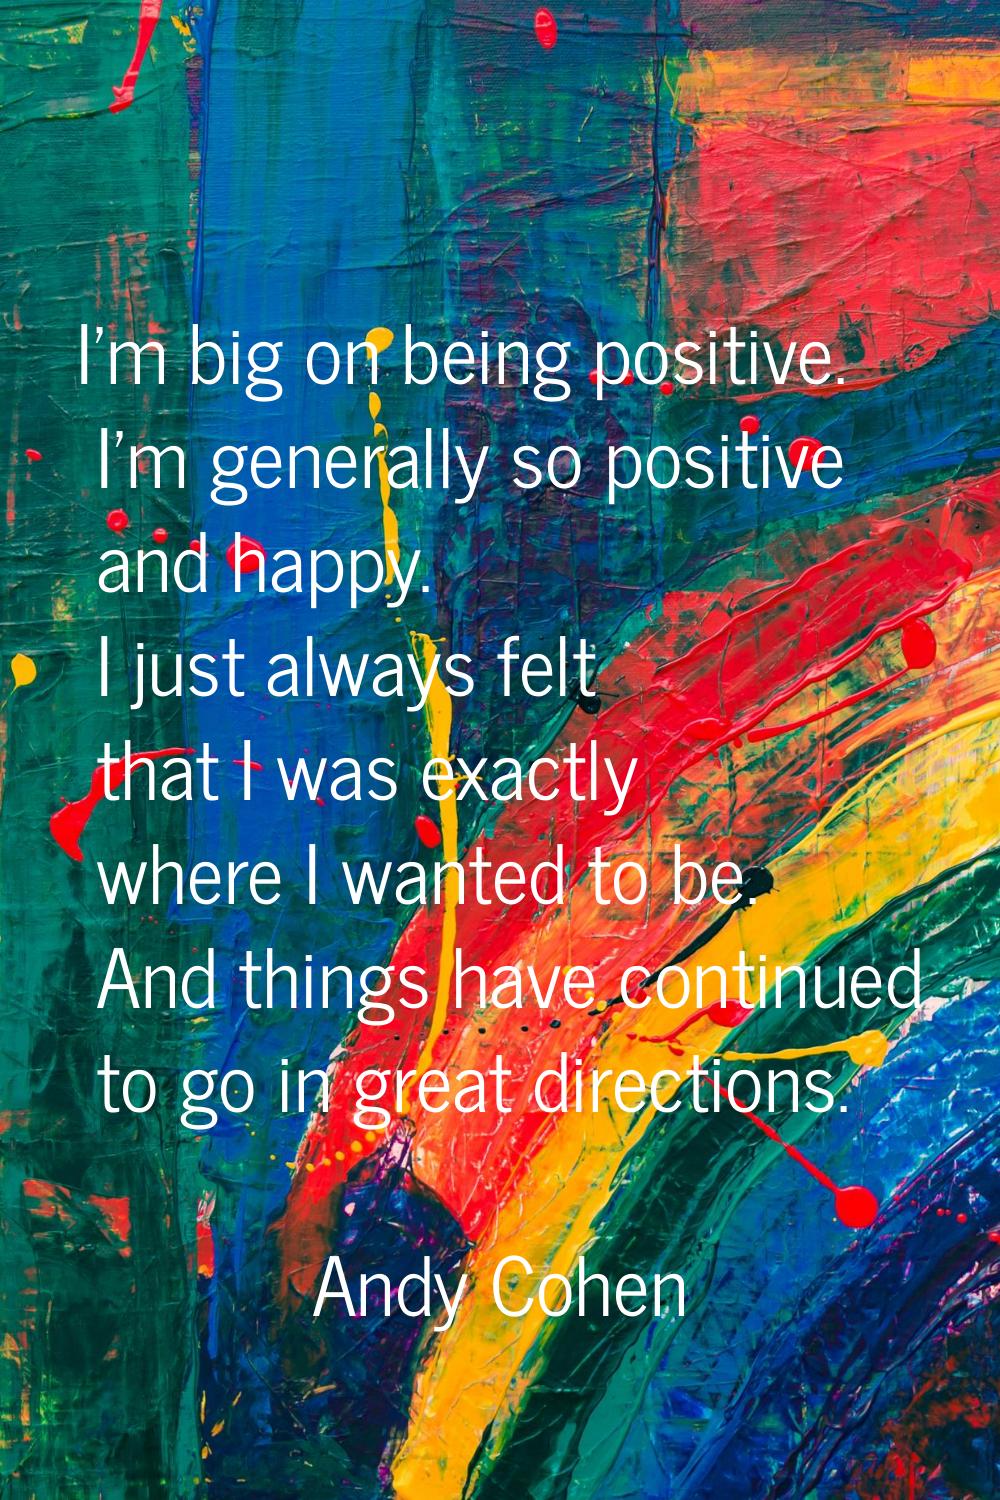 I'm big on being positive. I'm generally so positive and happy. I just always felt that I was exact